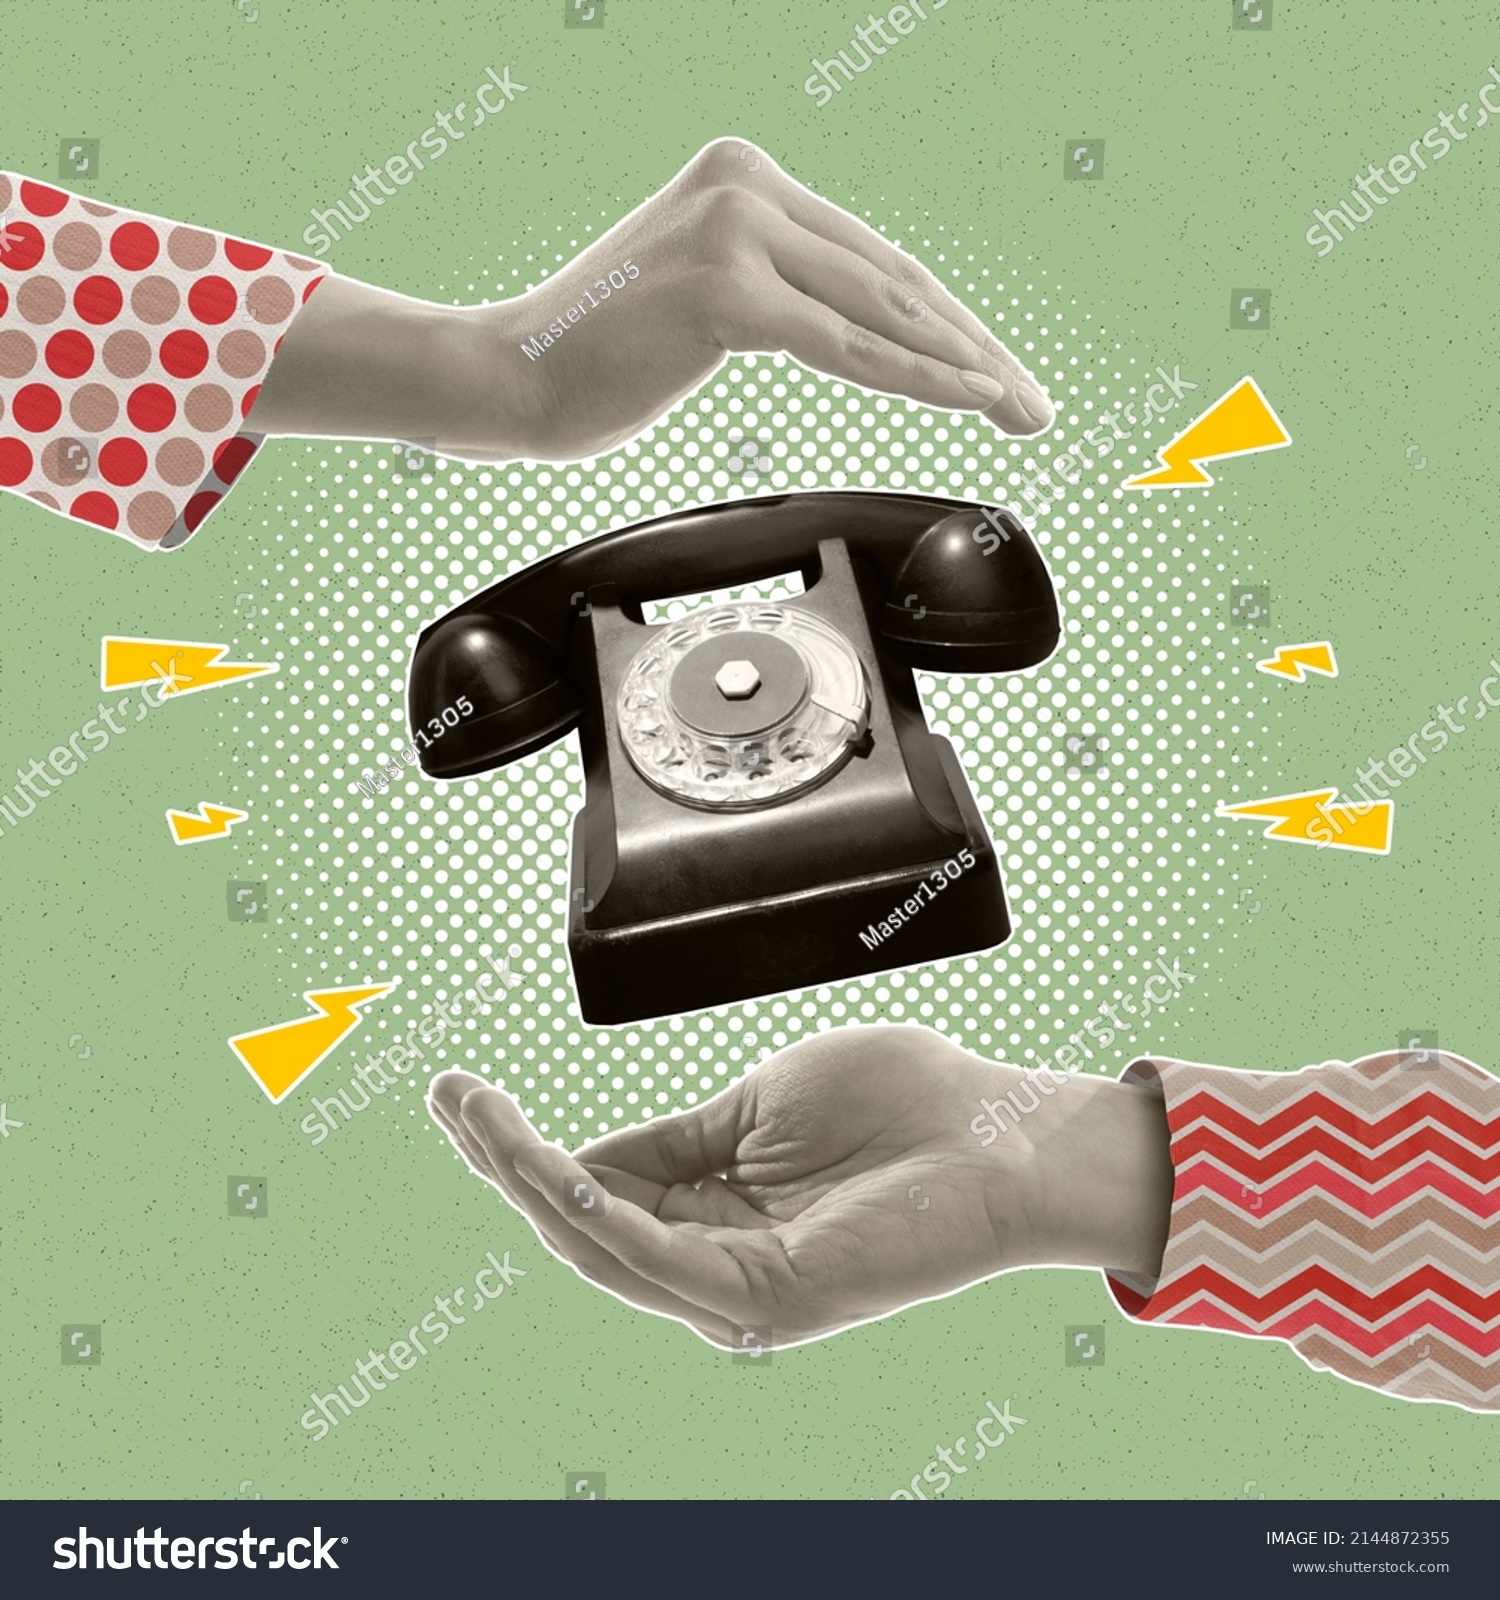 Contemporary art collage. Human hands holding retro vintage phone isolated over green background. Communication. Concept of style, retro, art, creativity, imagination. Copy space for ad #2144872355